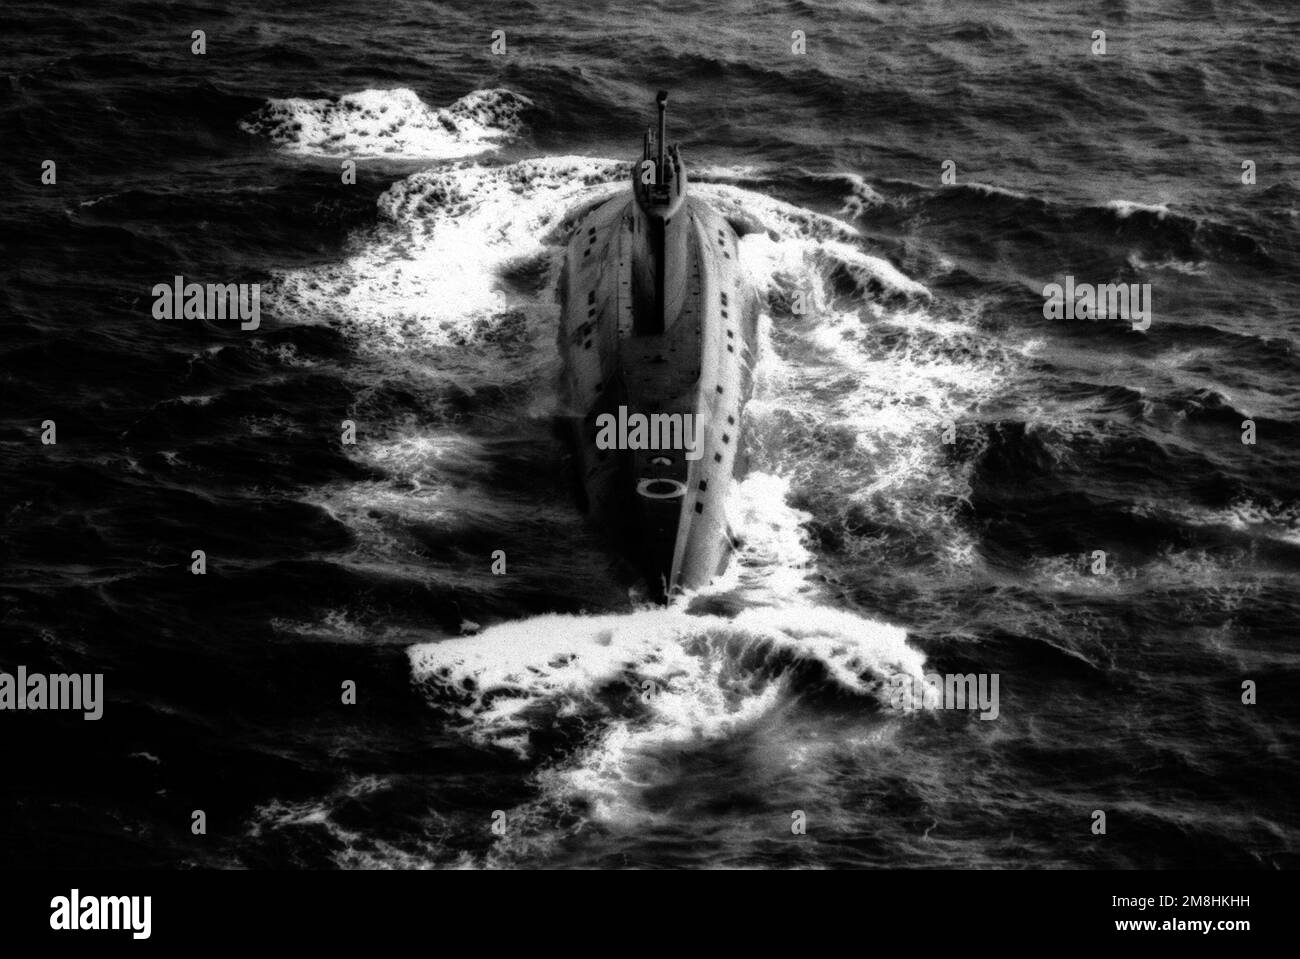 Stern-on view of Iran's second KILO class diesel-powered submarine underway en route from the Baltic to Iranian home waters. The submarine was photographed by Light Helicopter Squadron 48 (HSL-48) from the USS SPRUANCE (DD-963). Country: Unknown Stock Photo